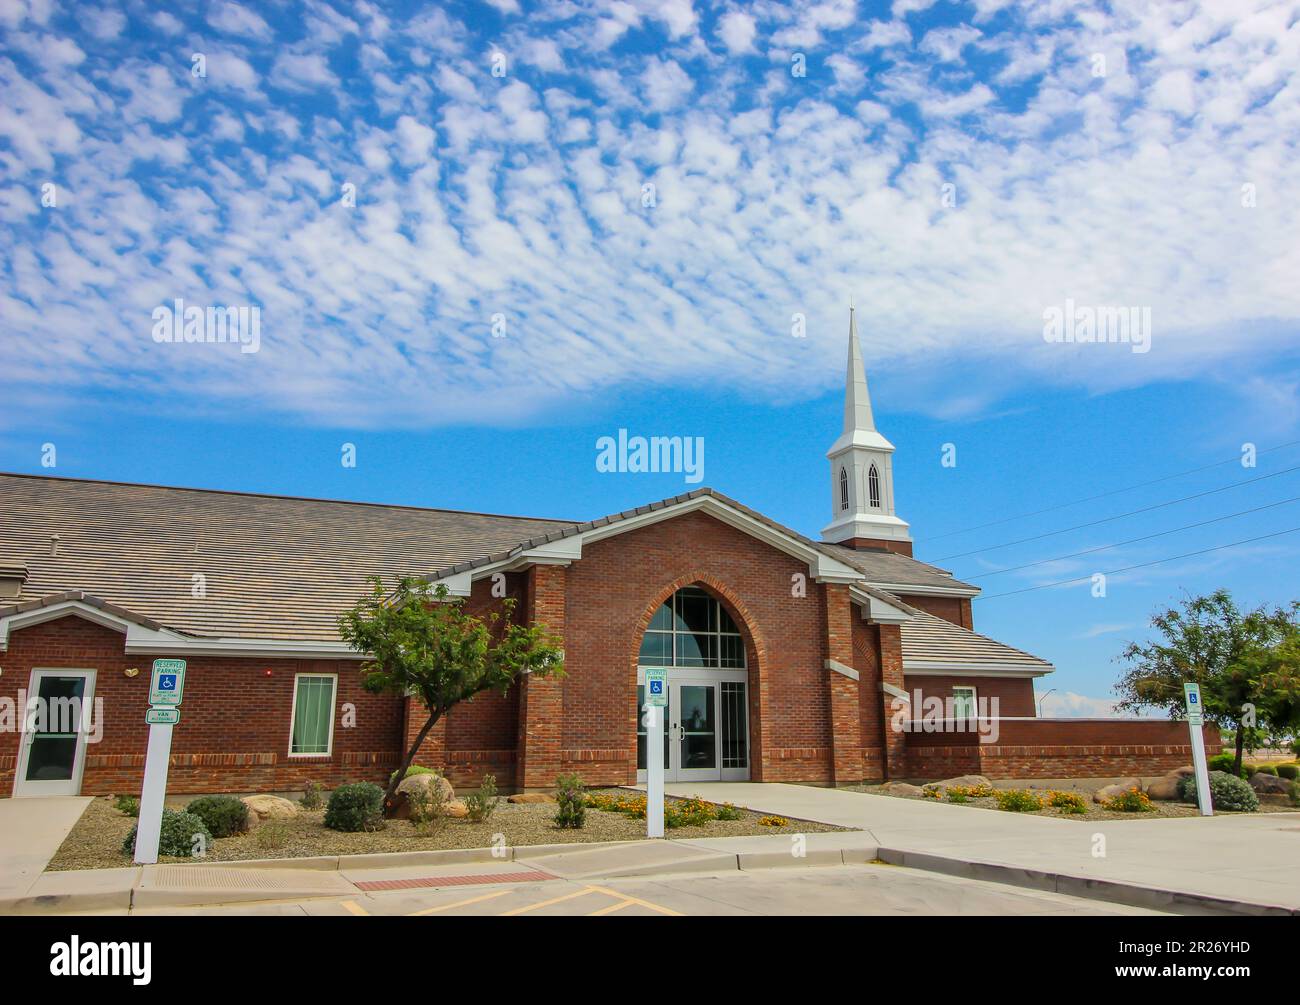 Local Church Entrance With White Steeple Stock Photo